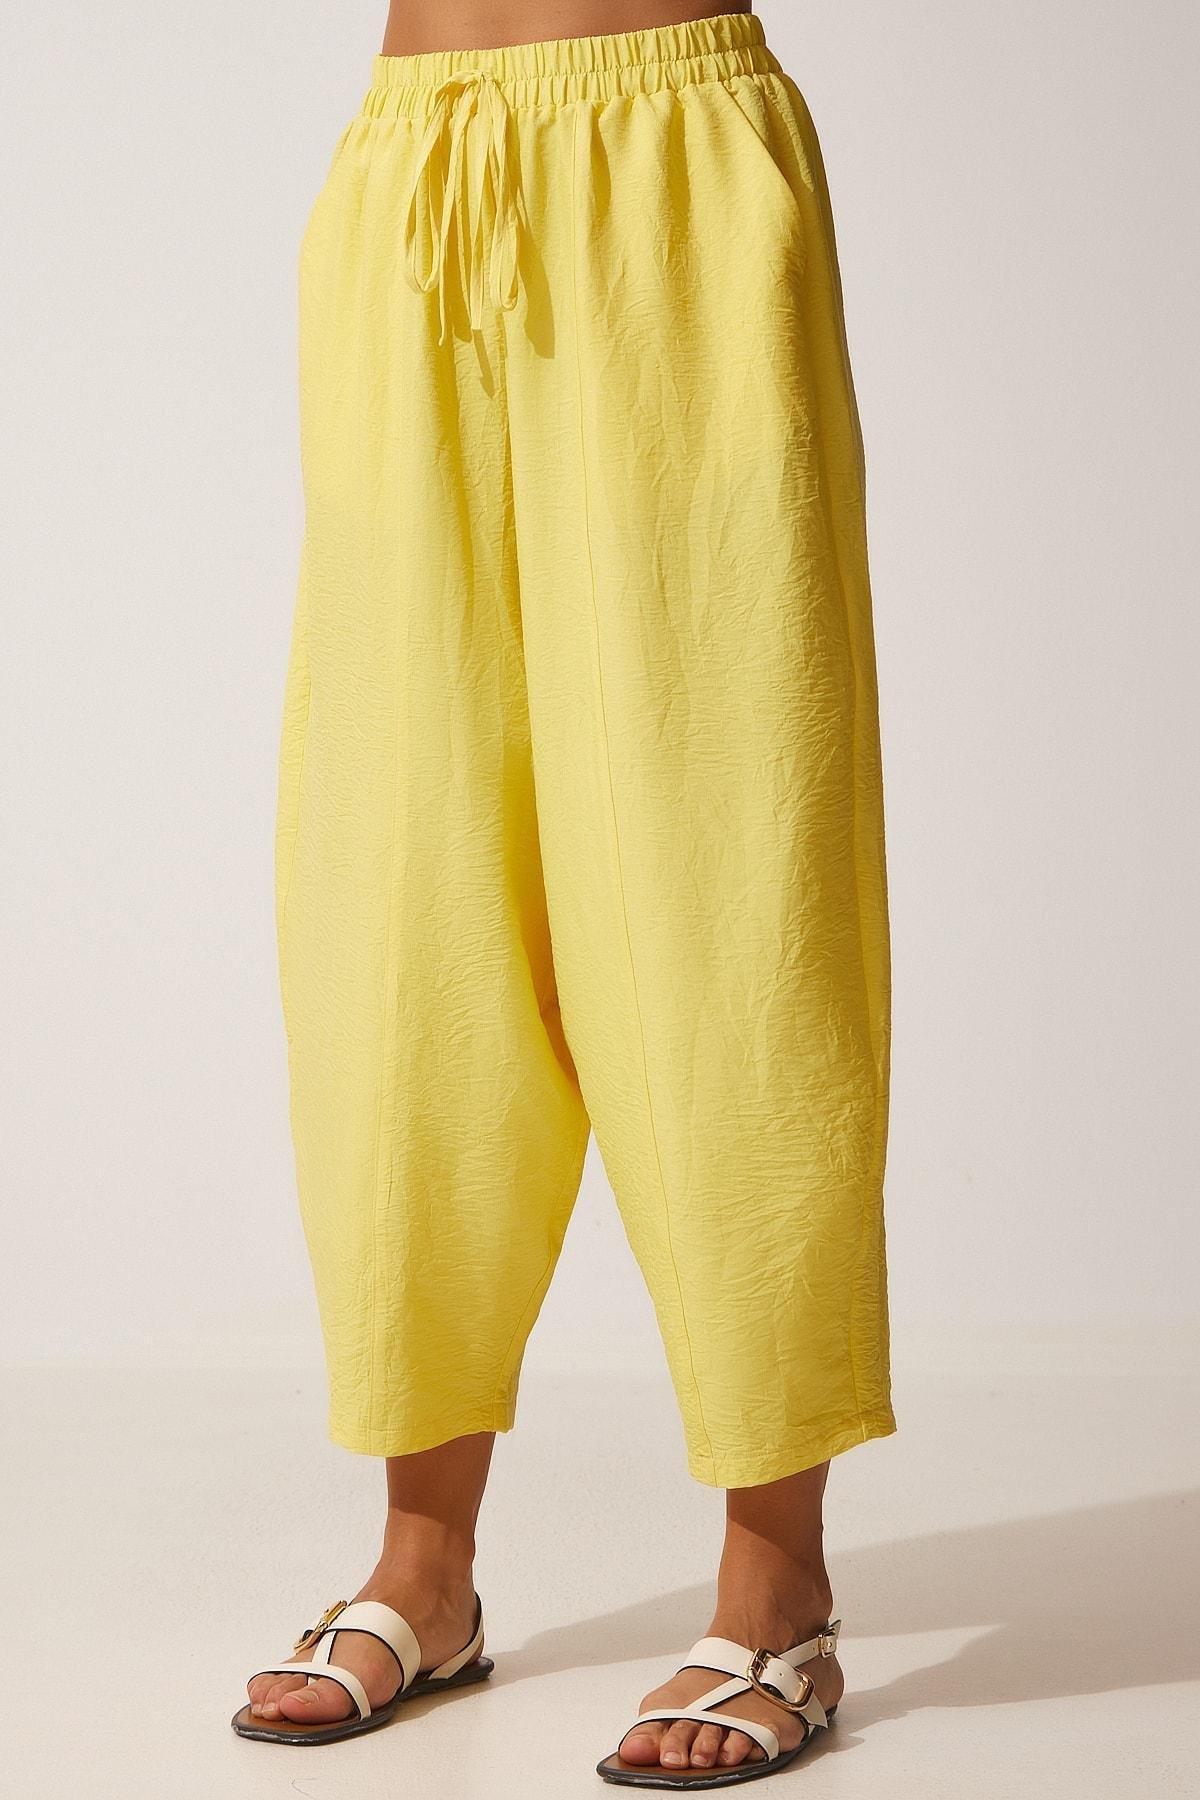 Happiness Istanbul - Yellow Pocket Sweater Baggy Pants